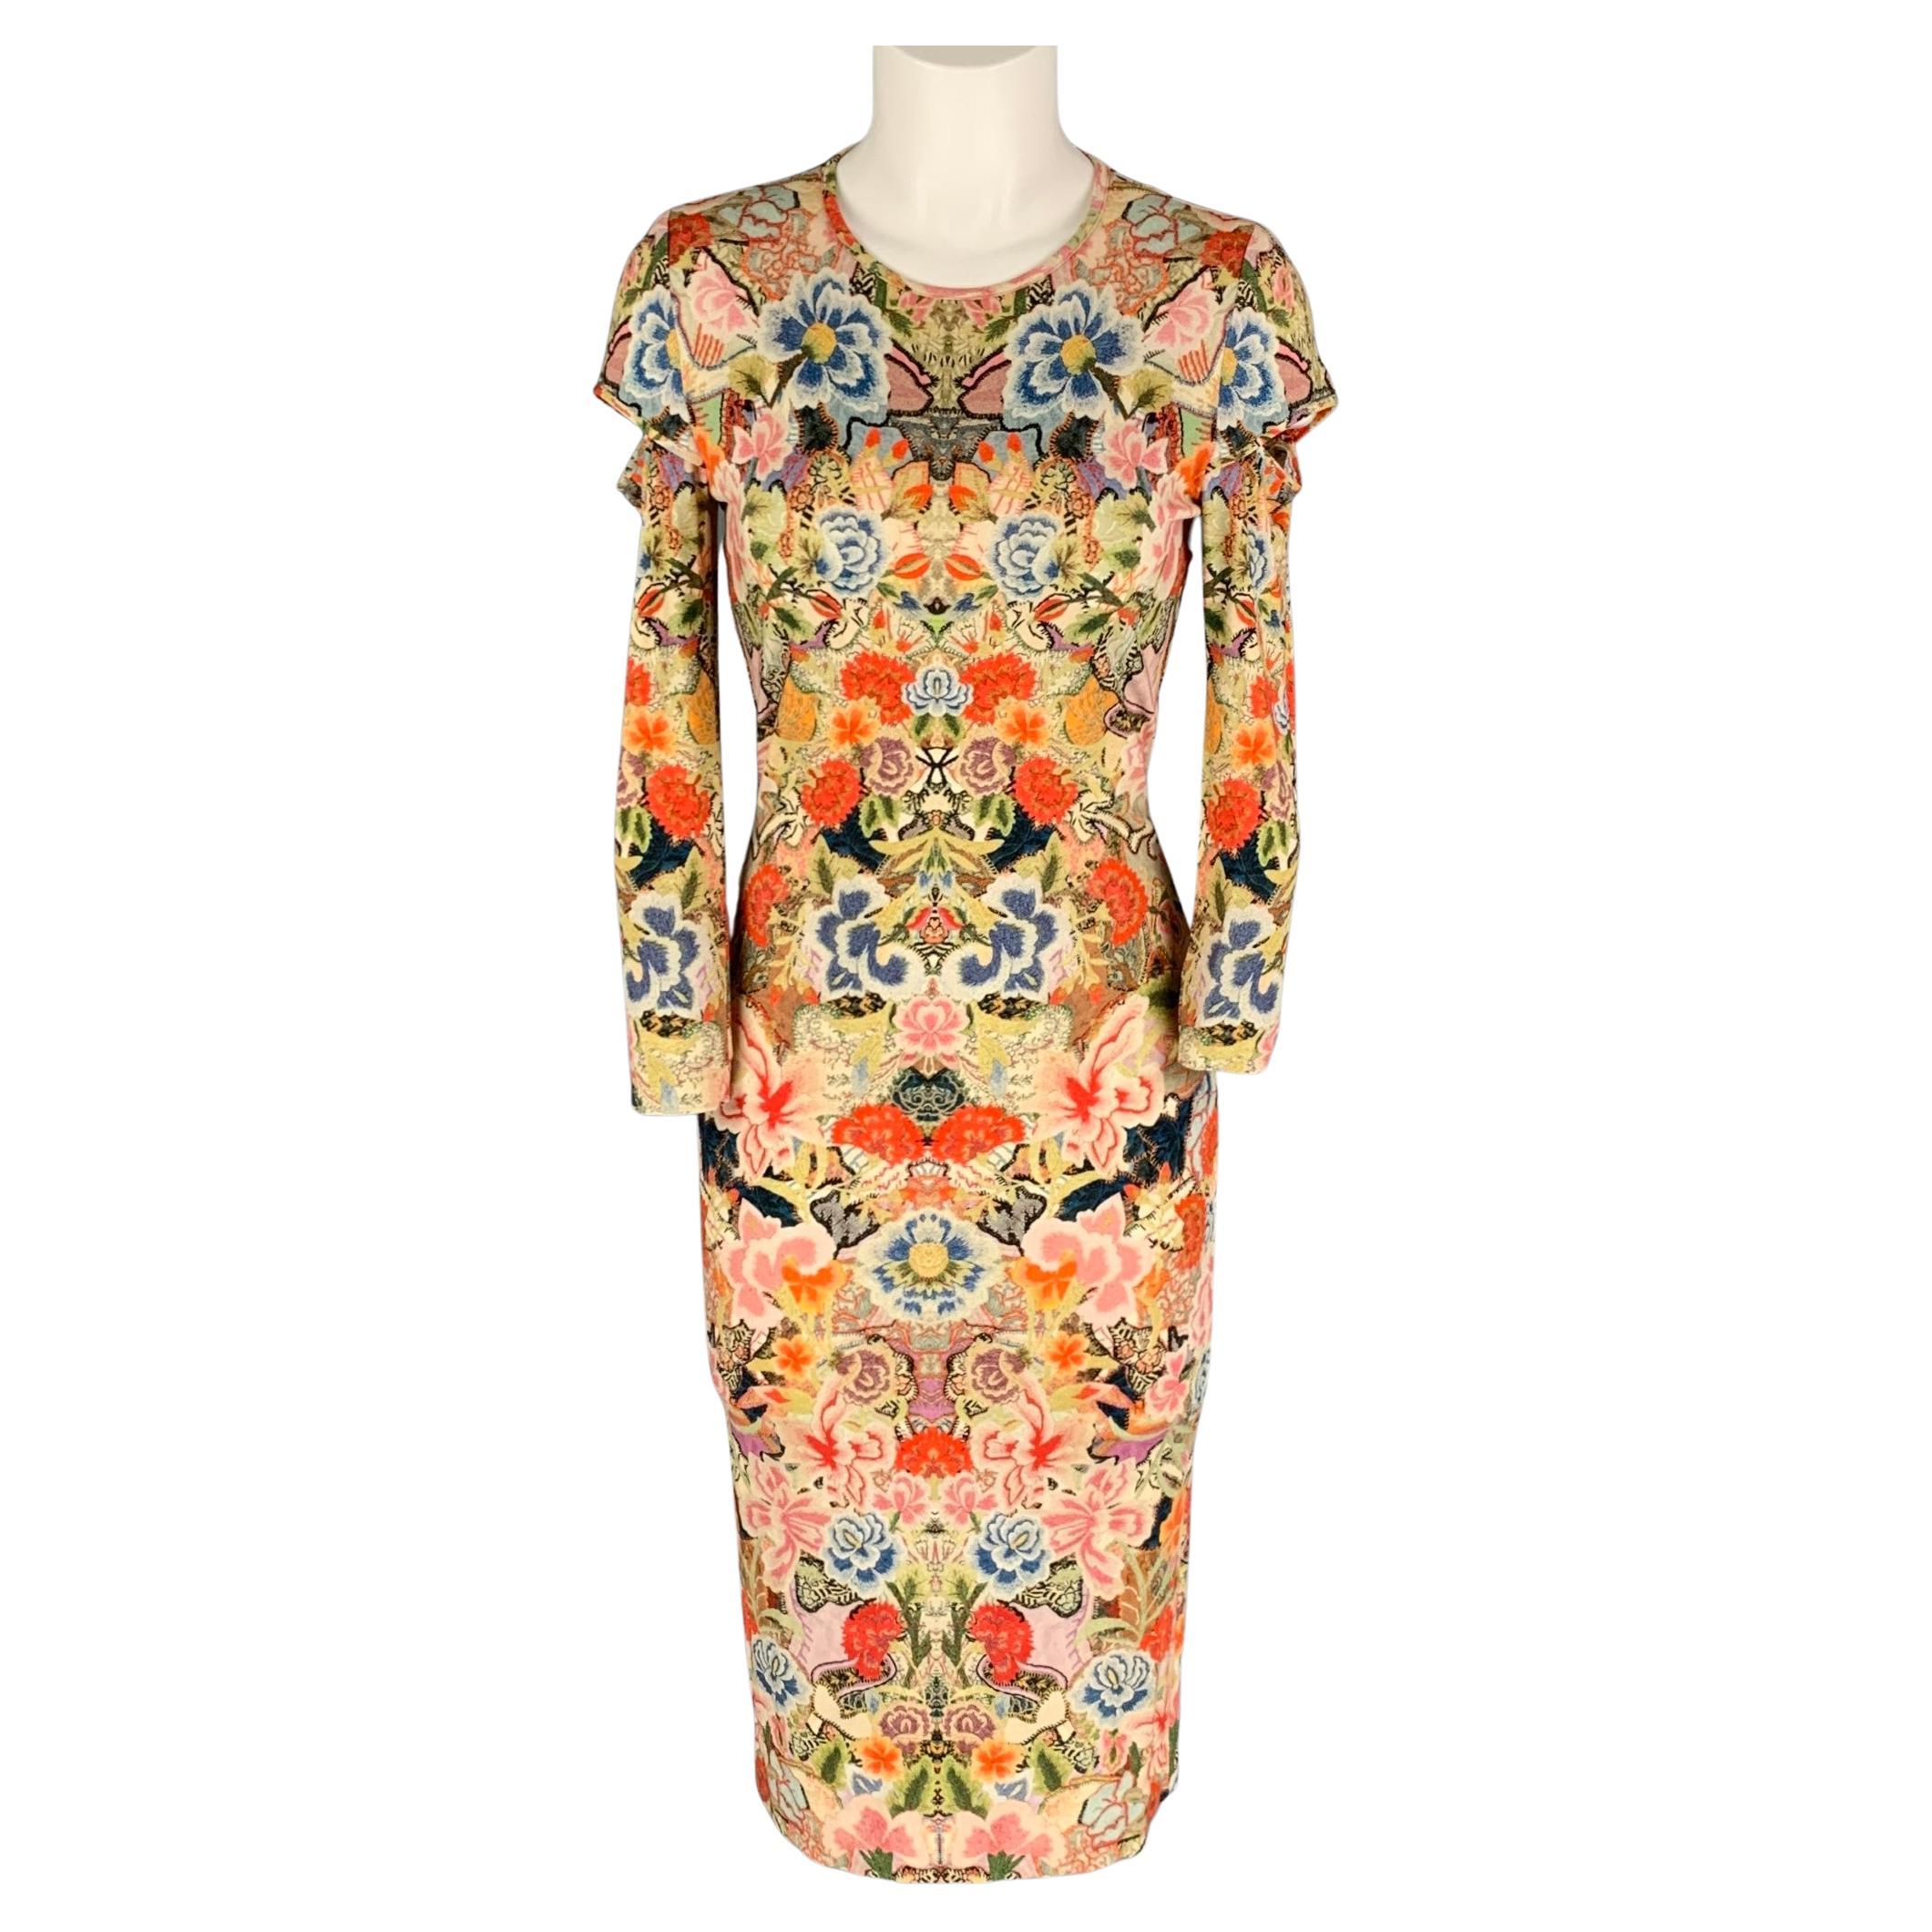 ALEXANDER MCQUEEN Size 4 Multi-Color Abstract Floral Rayon Blend Dress ...